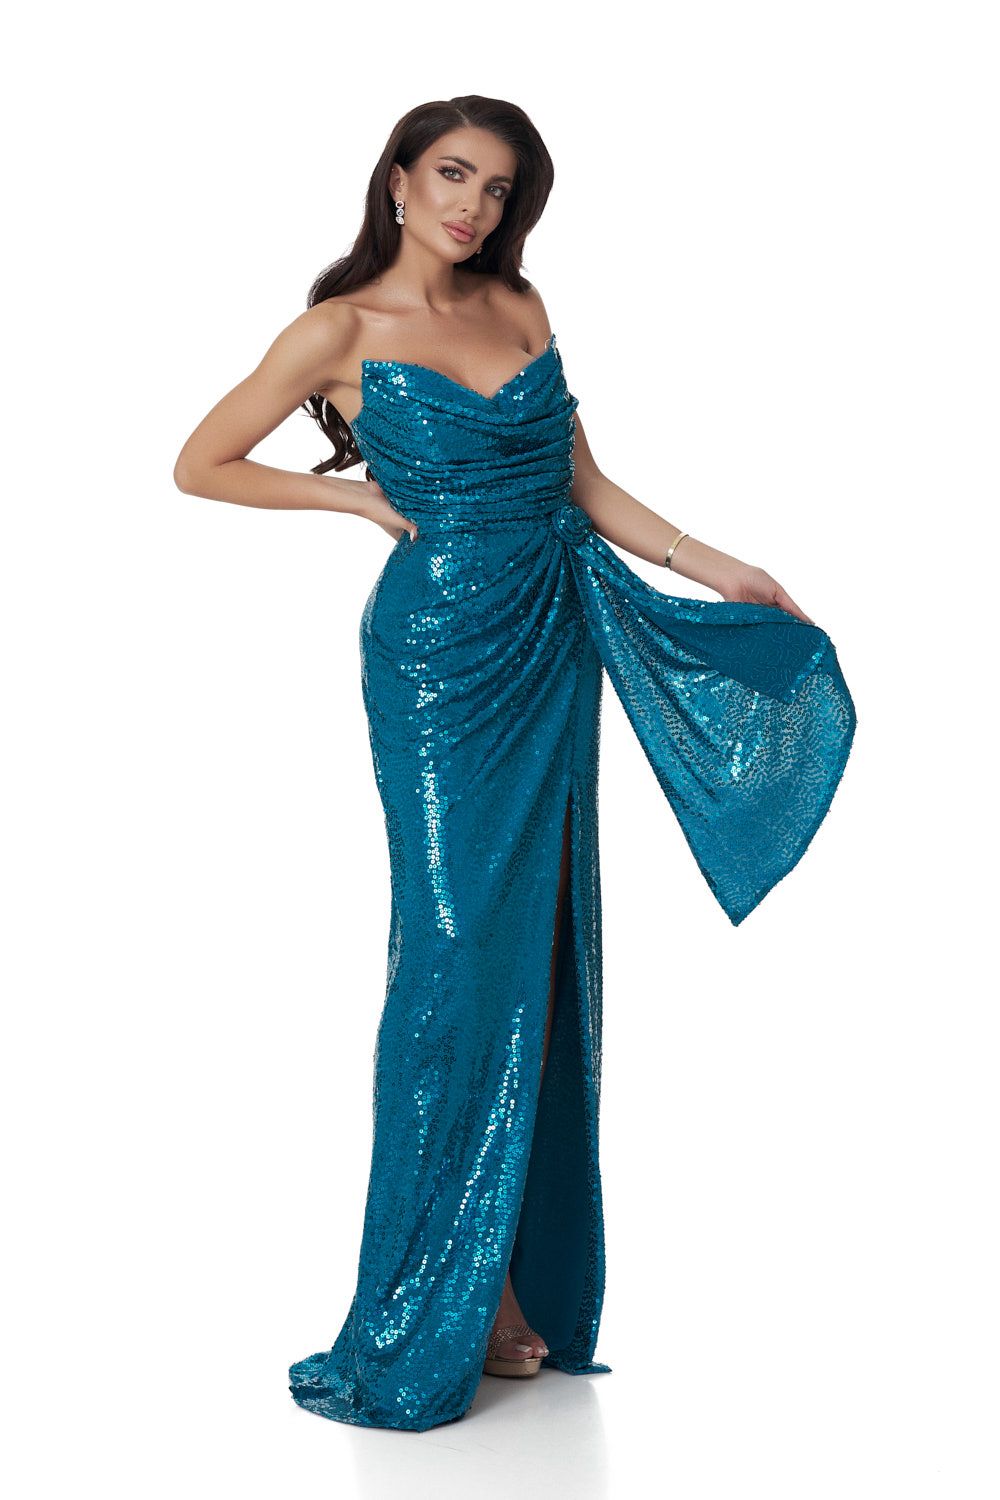 Turquoise sequin long dress for women by Nicomede Bogas